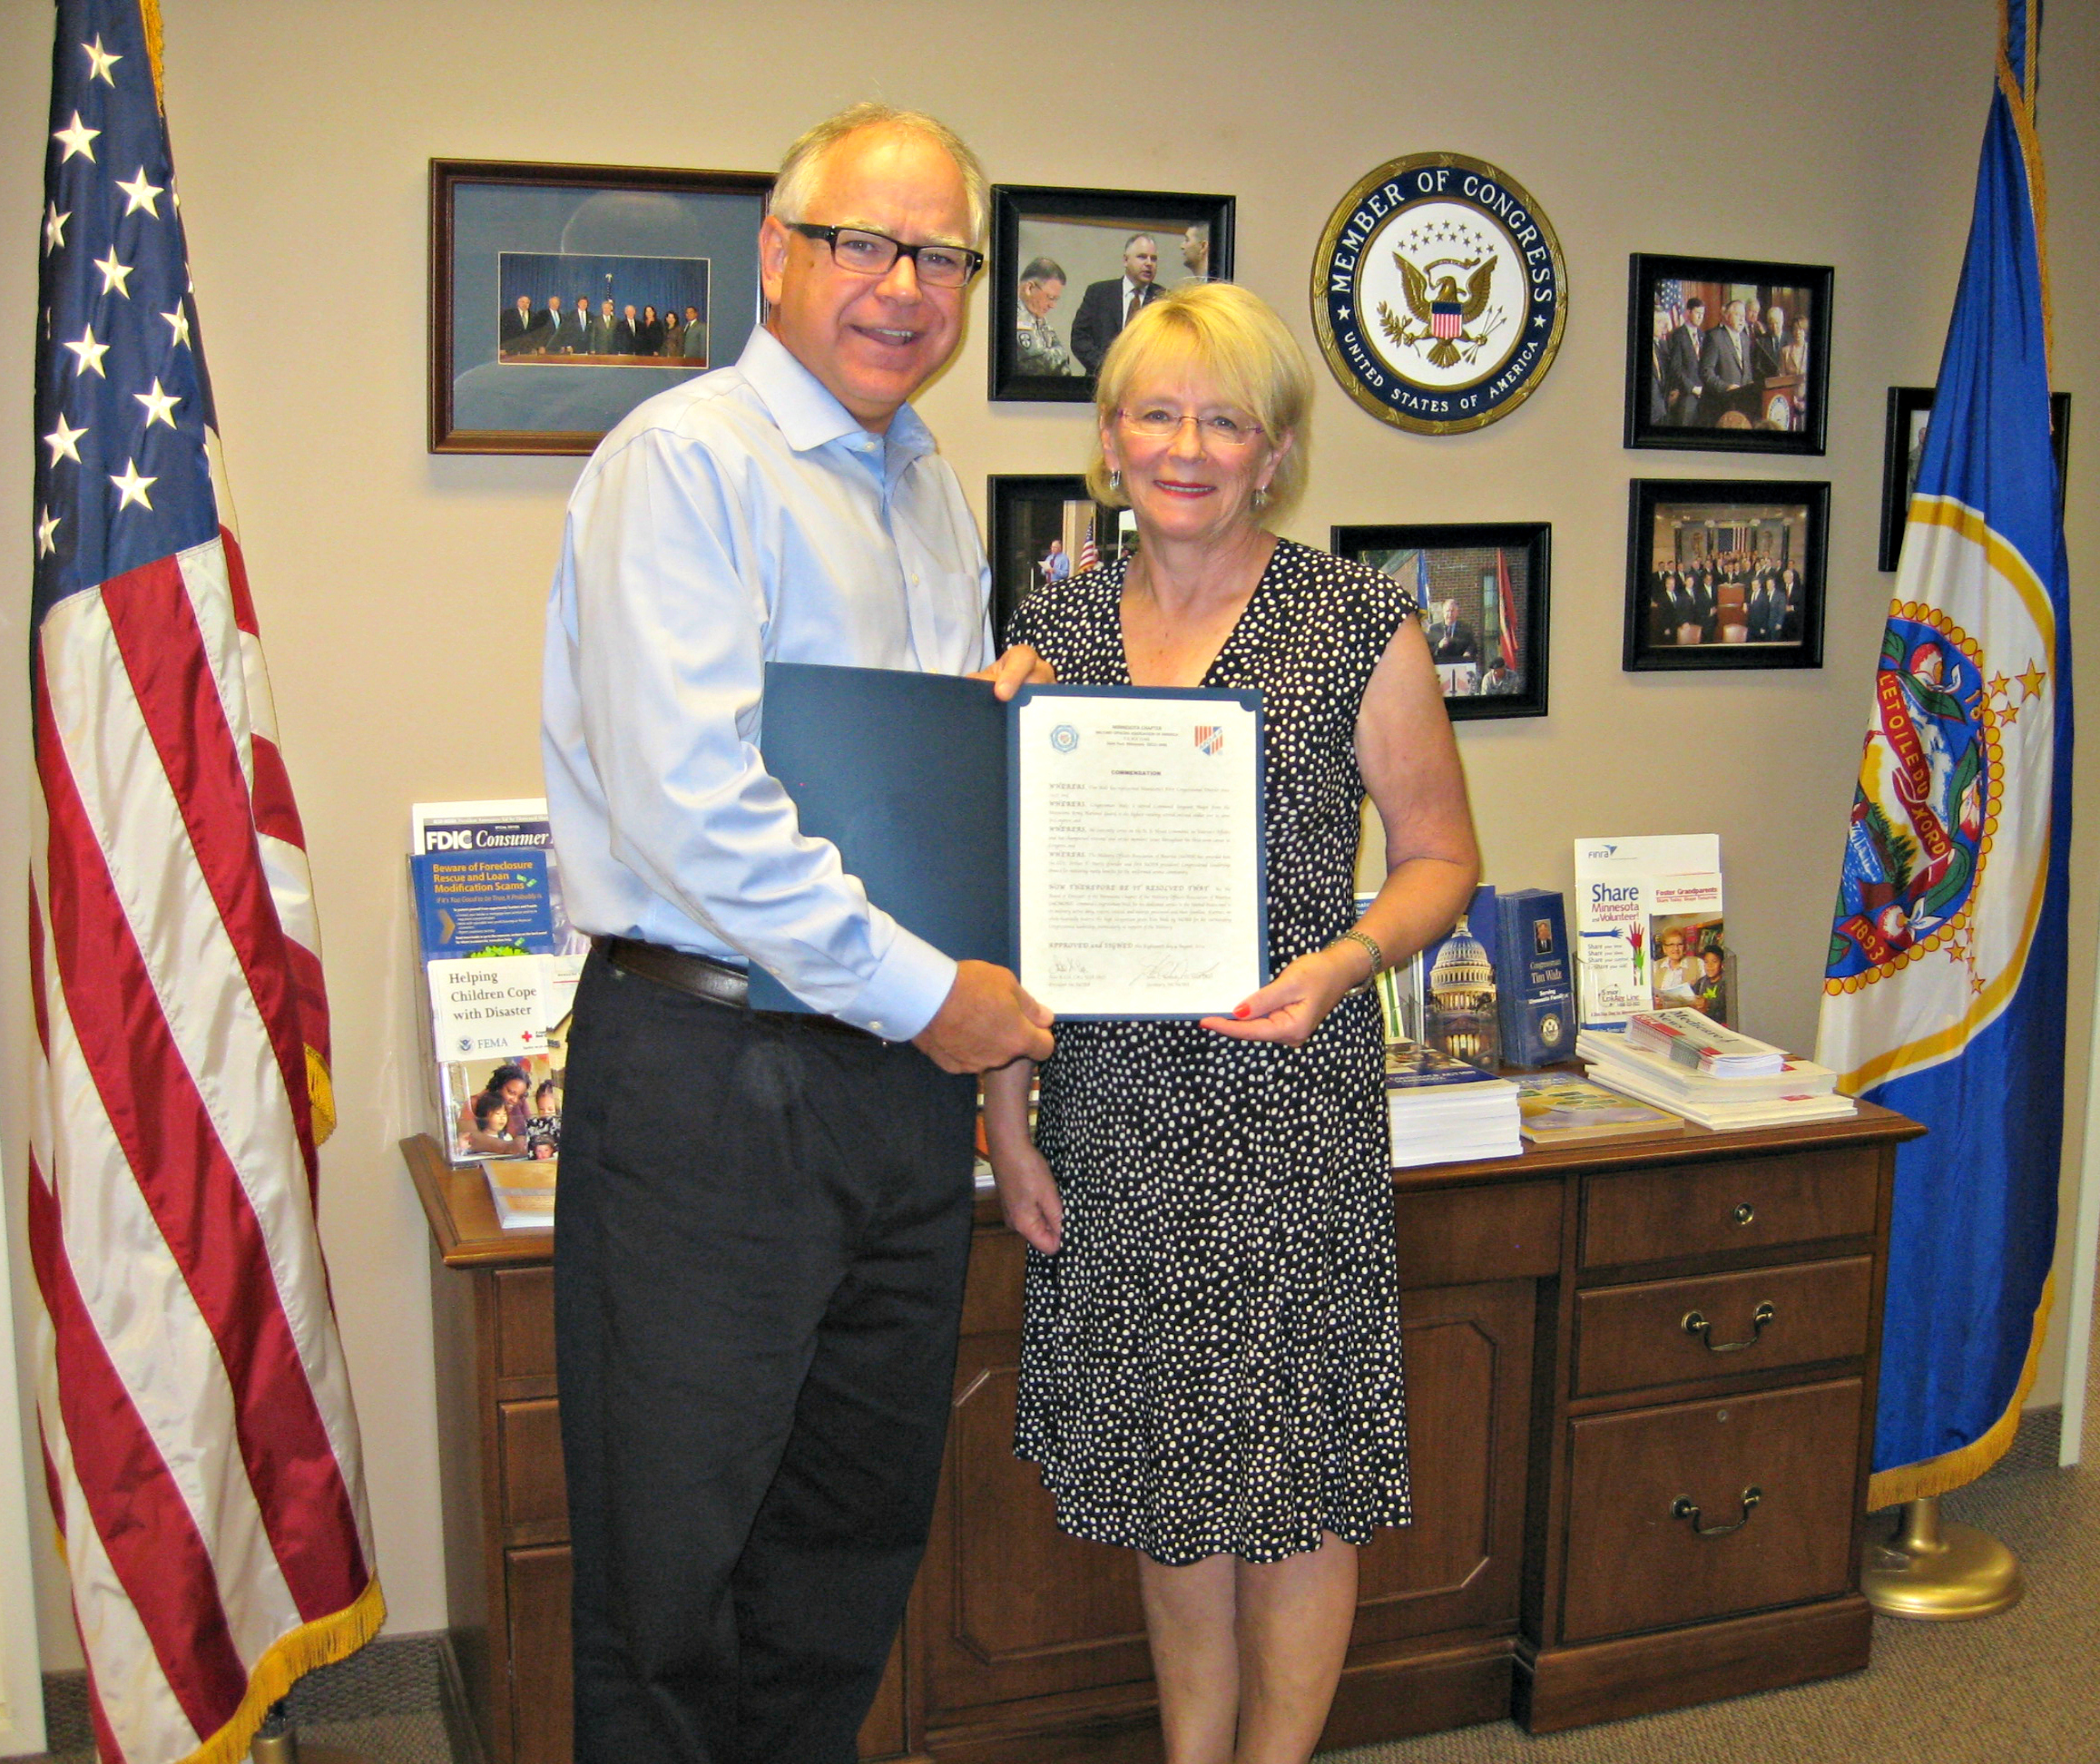 Rep. Walz alongside President of the Minnesota Chapter of MOAA, Rita K. Cox, Chief Warrant Officer 2, United States Army, Retired